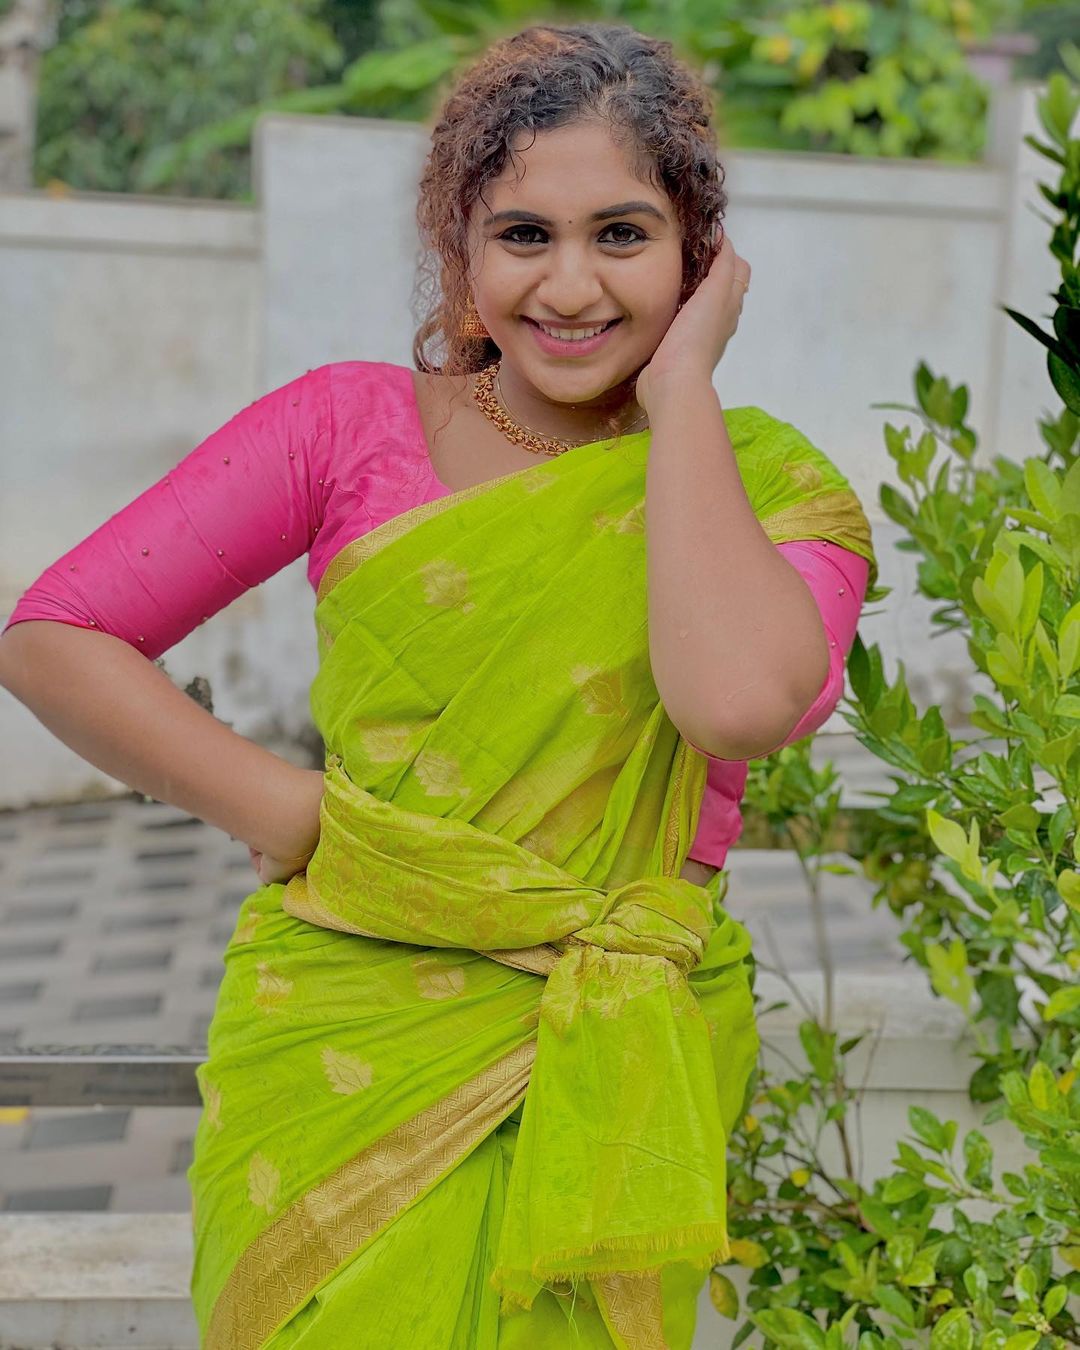 Noorinshereef Nude - Noorin Shereef (Actress) Biography, Wiki, Age, Height, Career, Family,  Awards and Many More